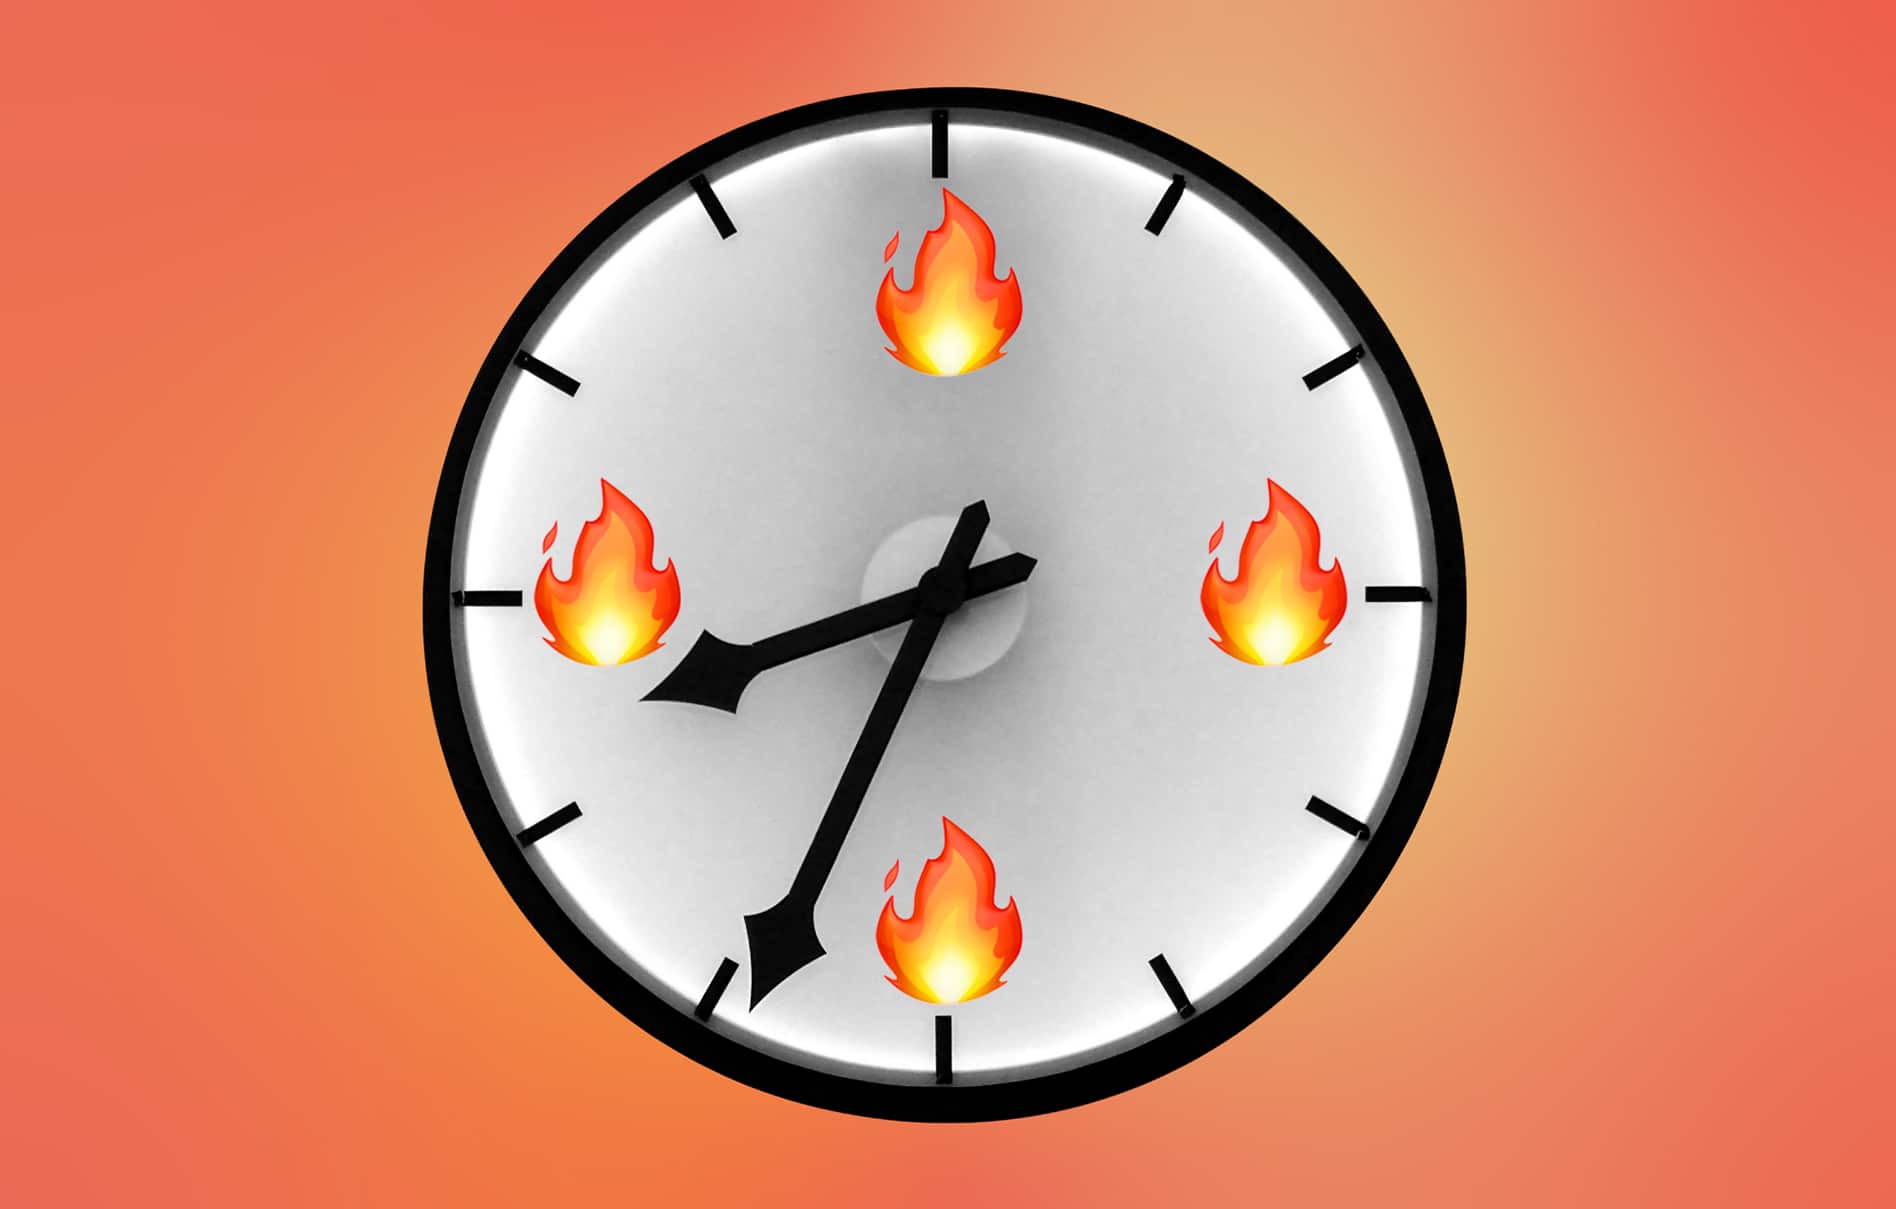 Clock with fire emoji instead of numbers